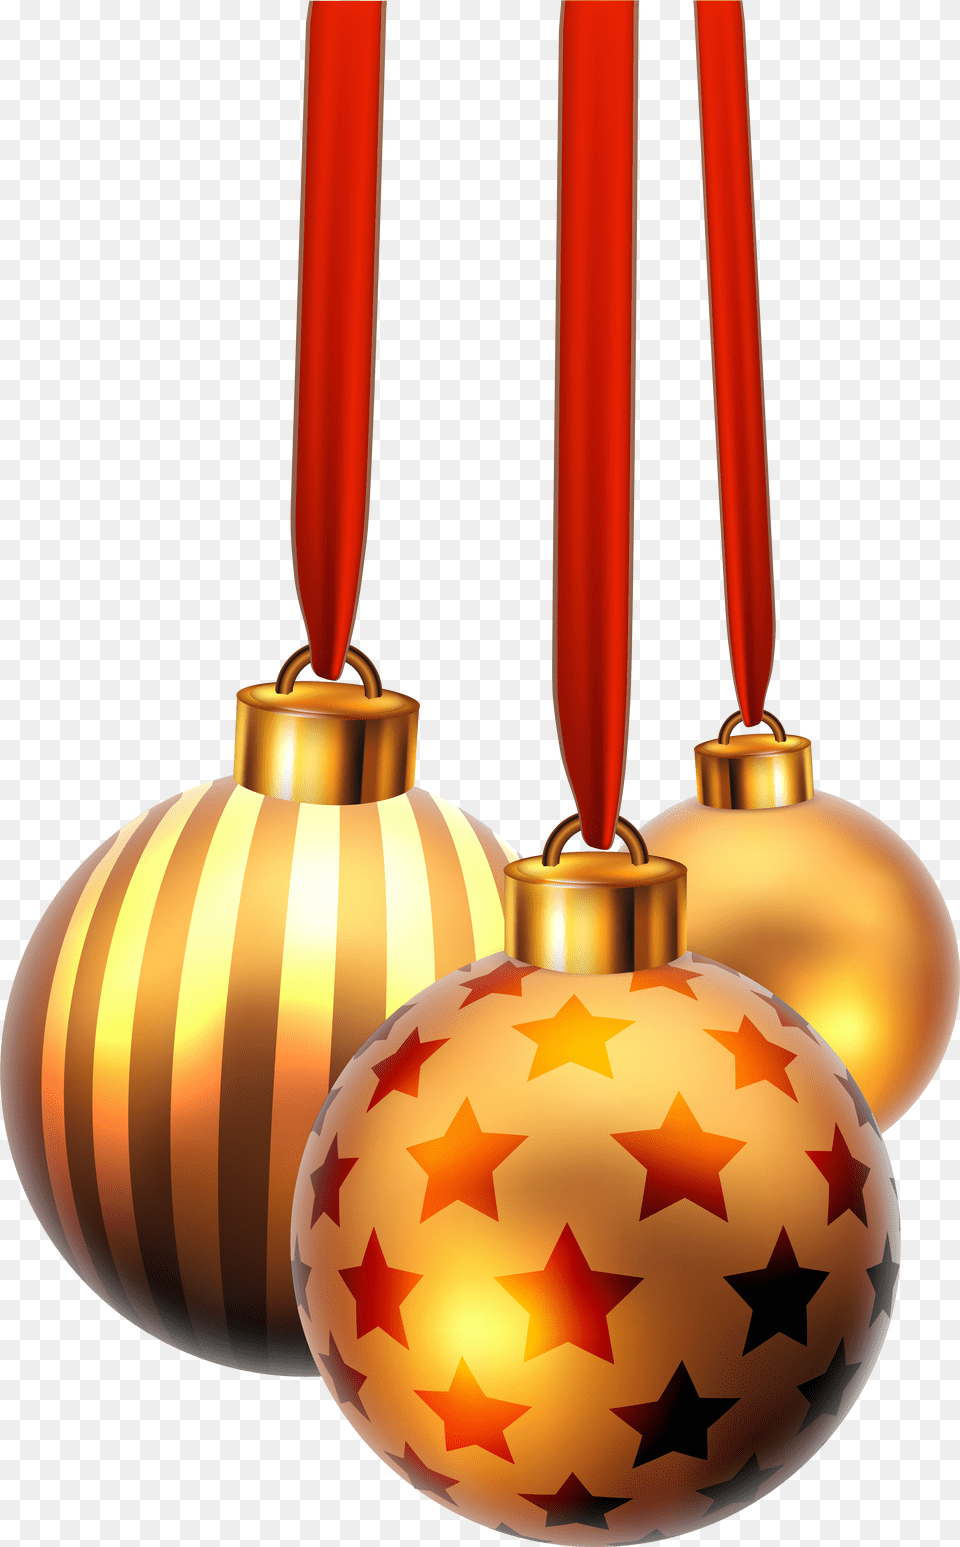 Christmas Balls Image Christmas Ball, Gold, Lighting, Accessories, Ornament Free Png Download